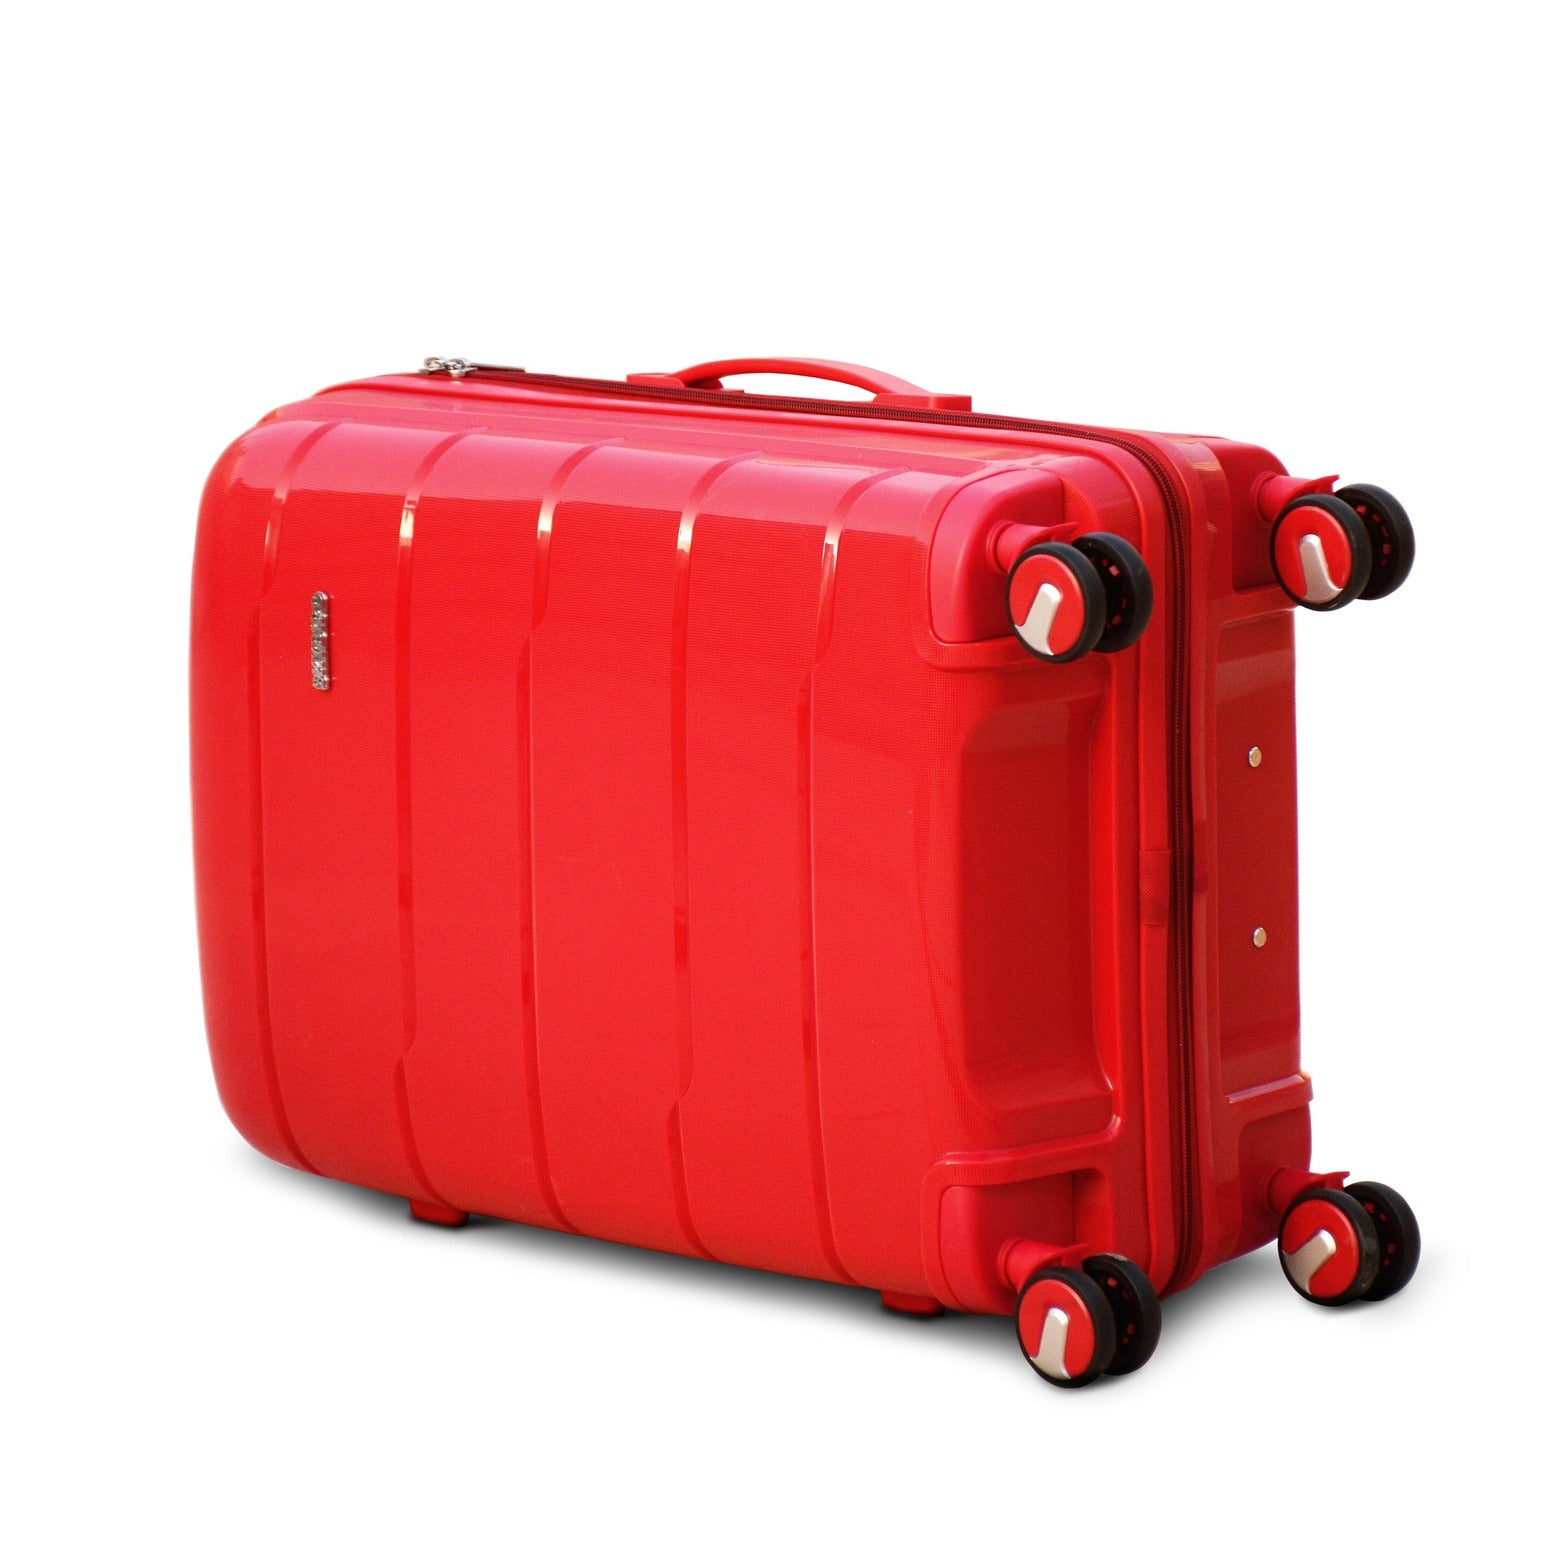 24" Red Colour Ceramic Smooth PP Luggage Lightweight Hard Case Trolley Bag With Double Spinner Wheel